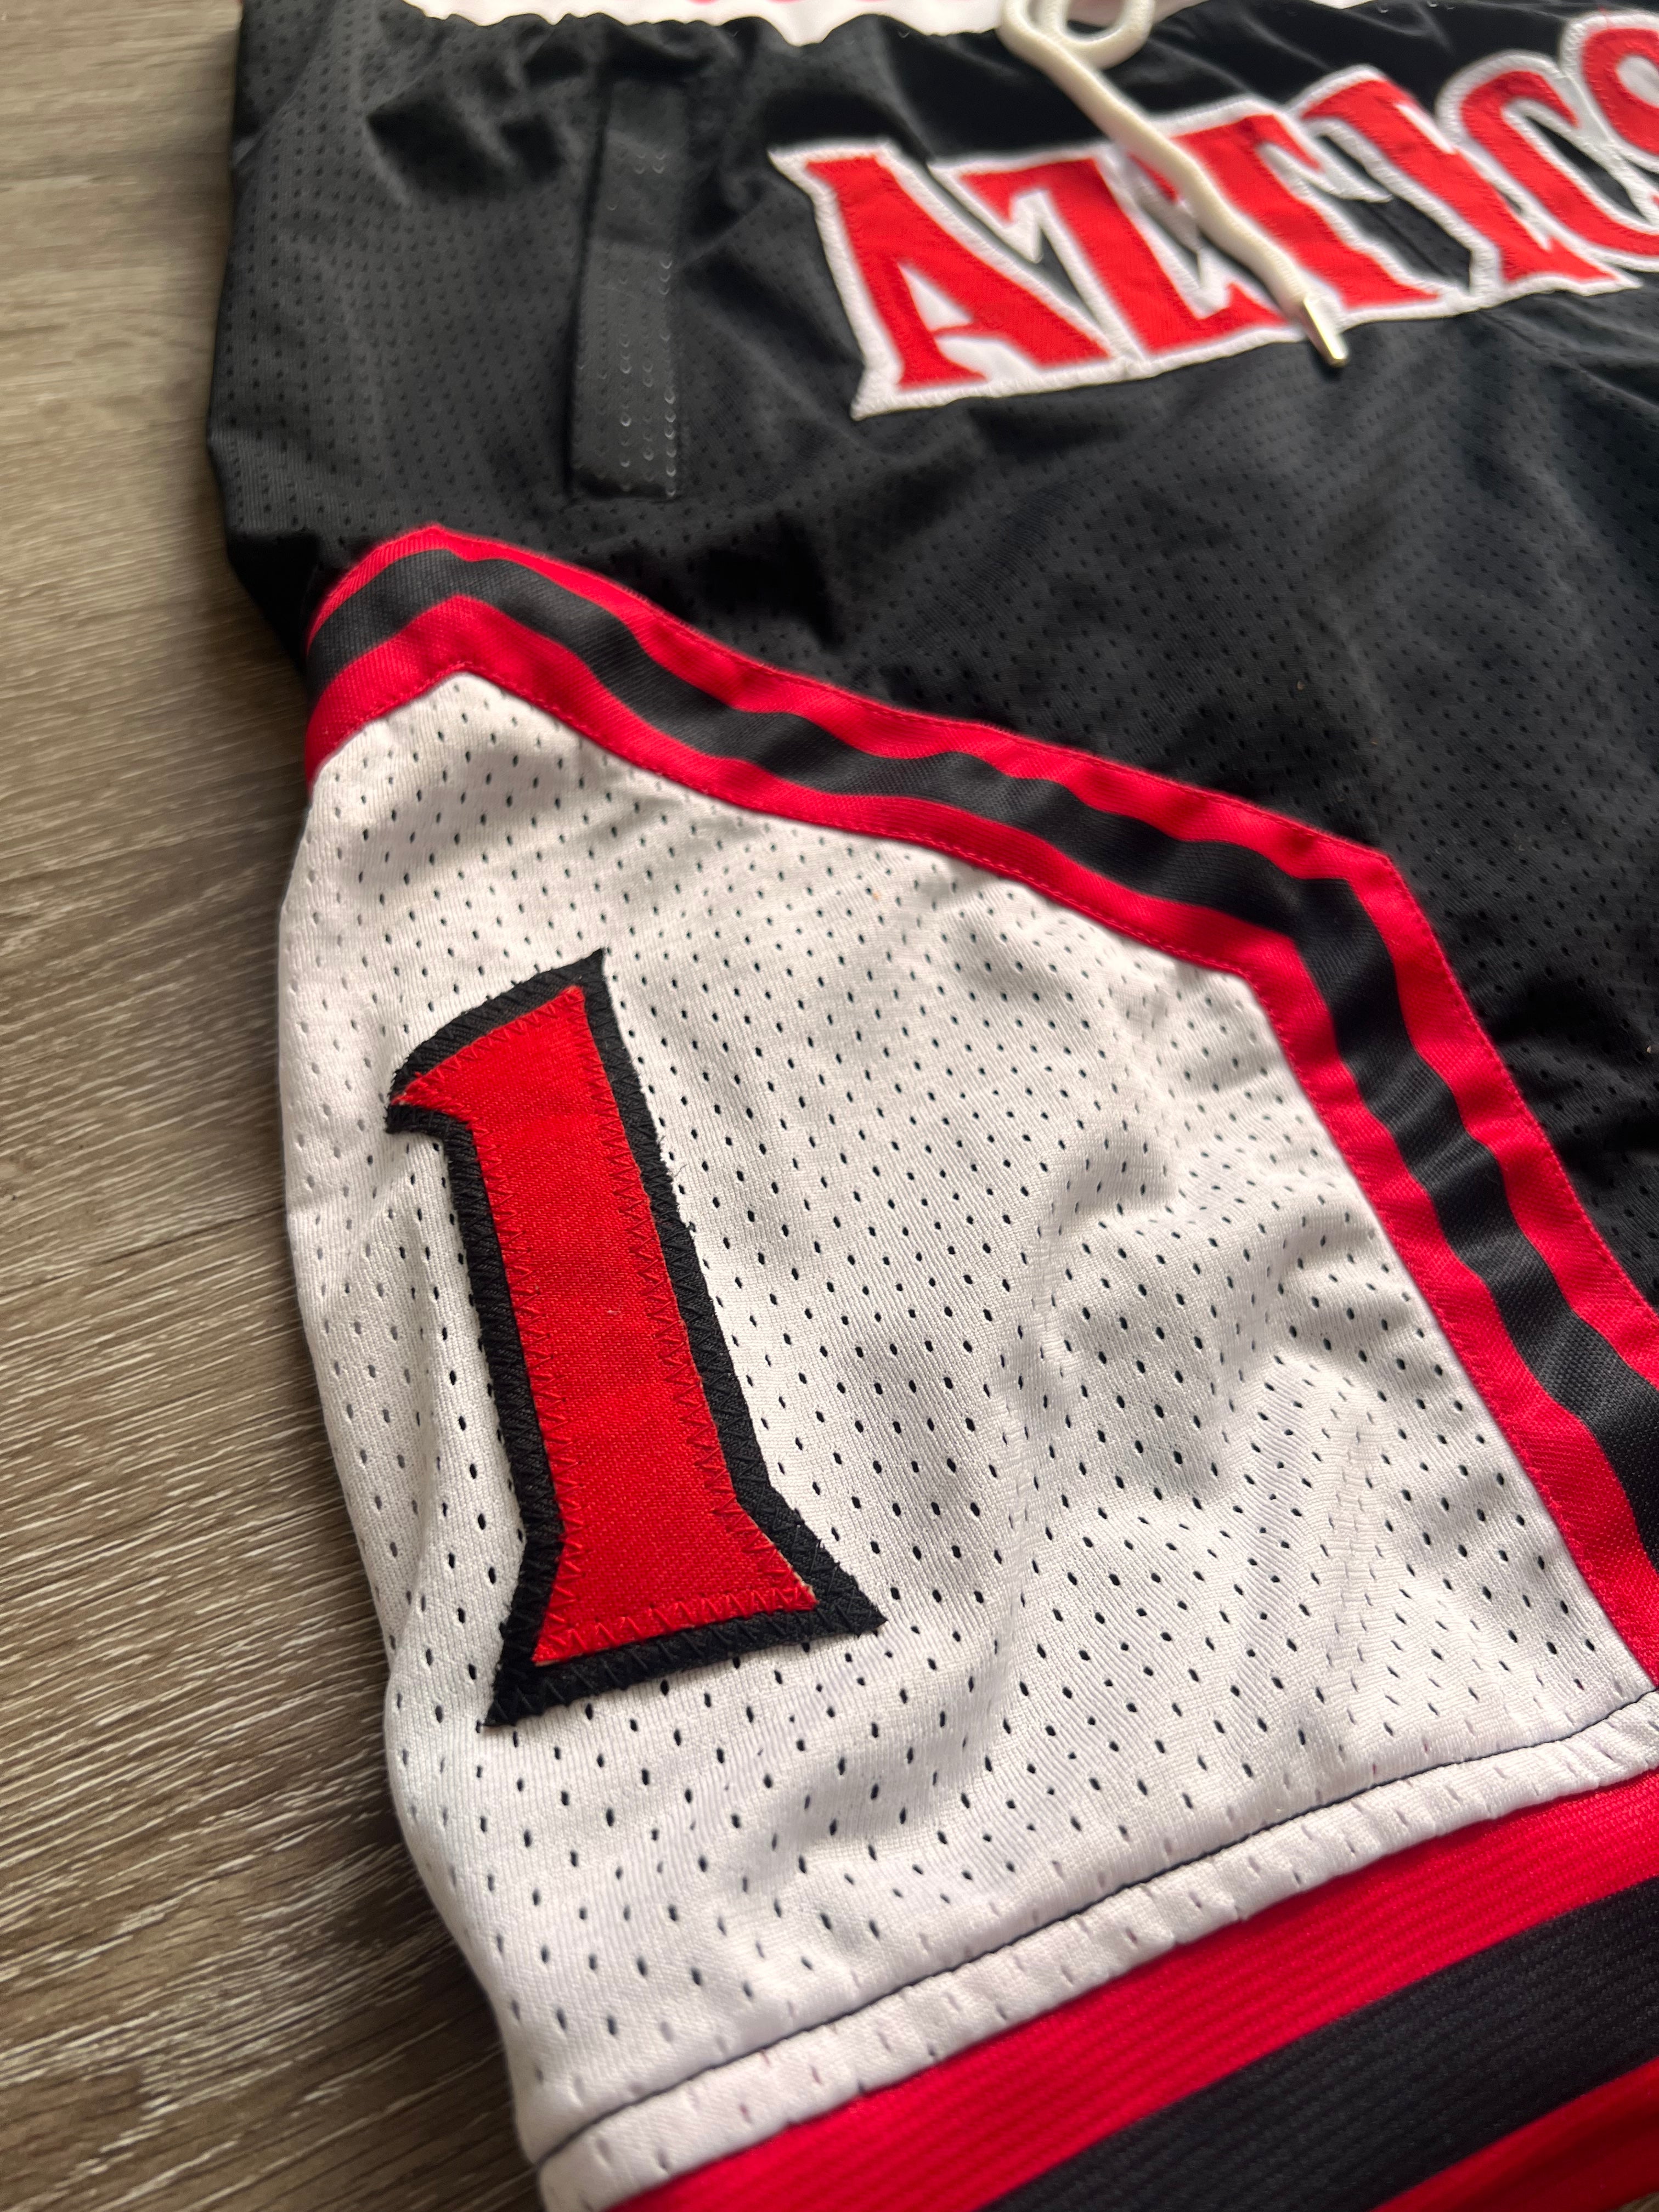 San Diego State Embroidered Basketball Shorts